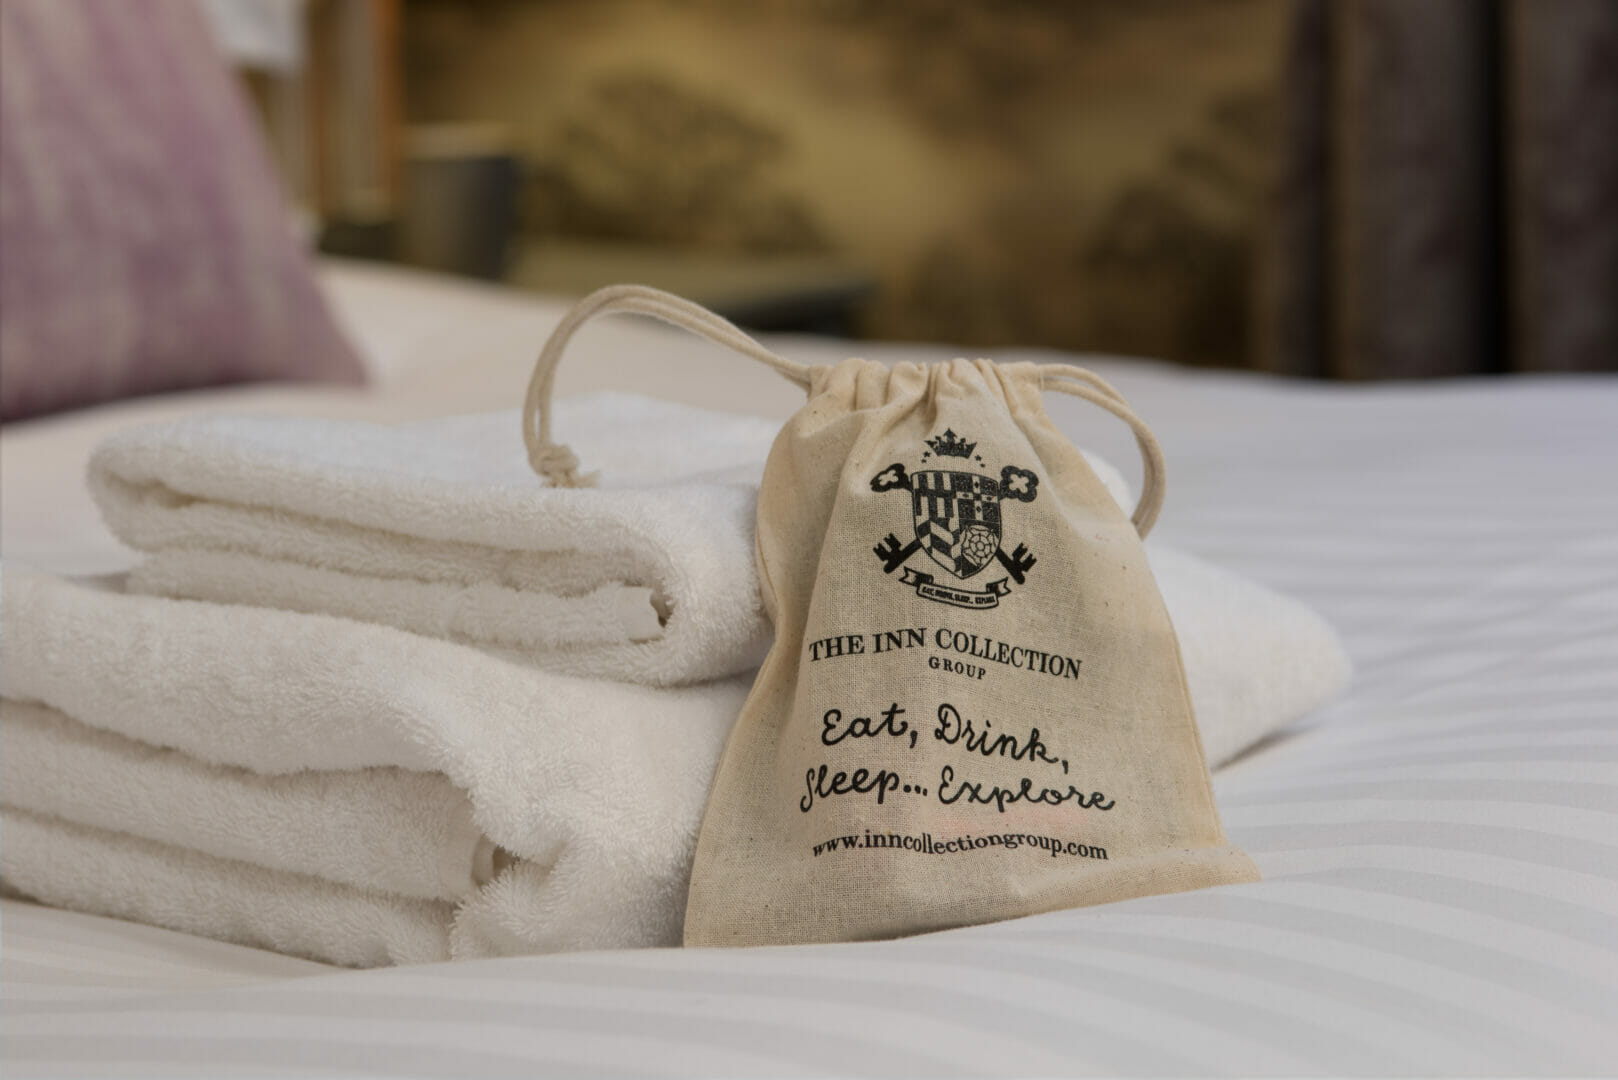 Full Steam Ahead for New Lake District Inn Collection Ventures @Inn_Collection